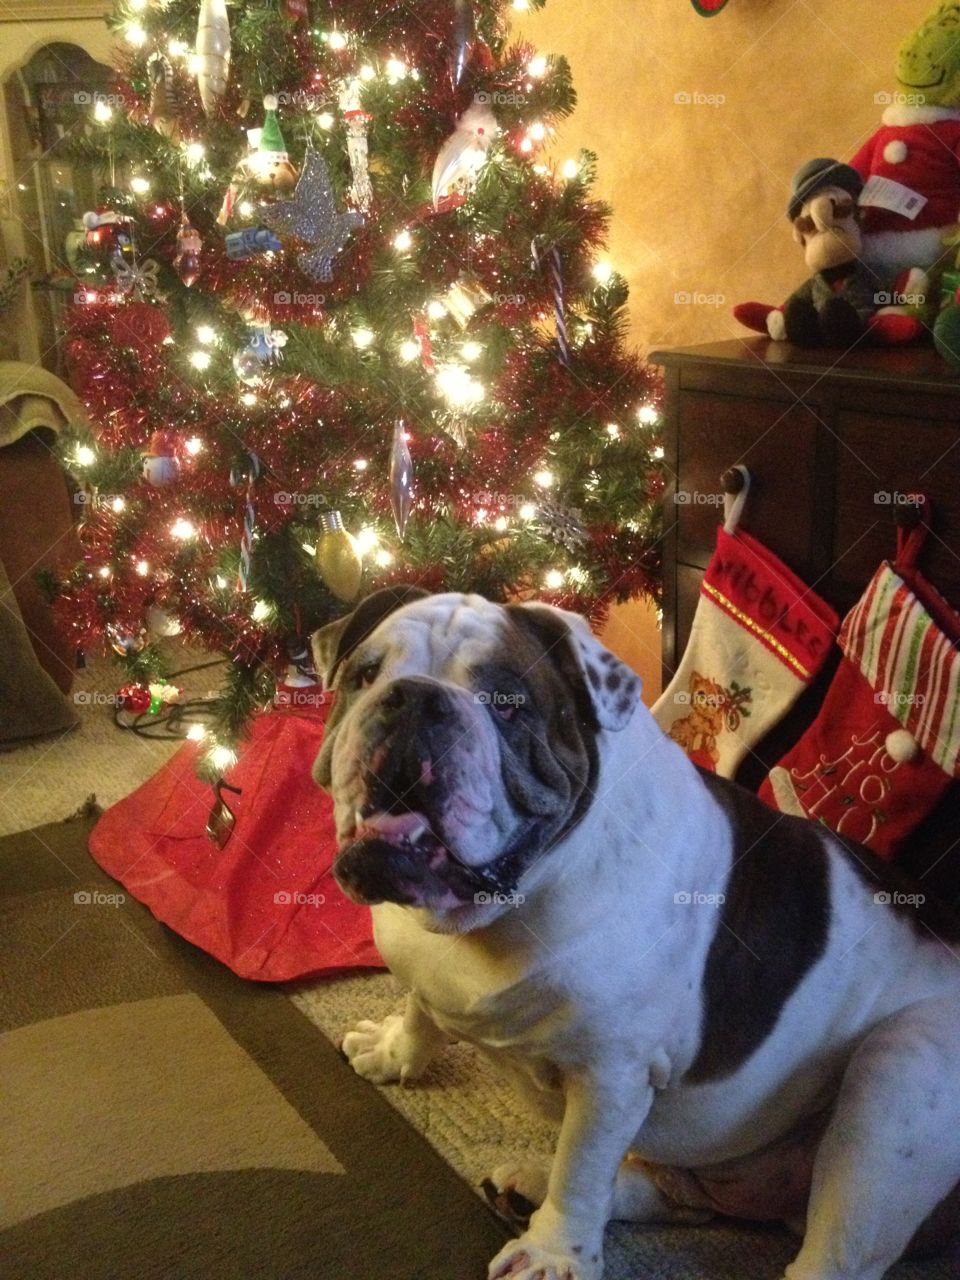 Romeo waiting for Presents (Chicago)